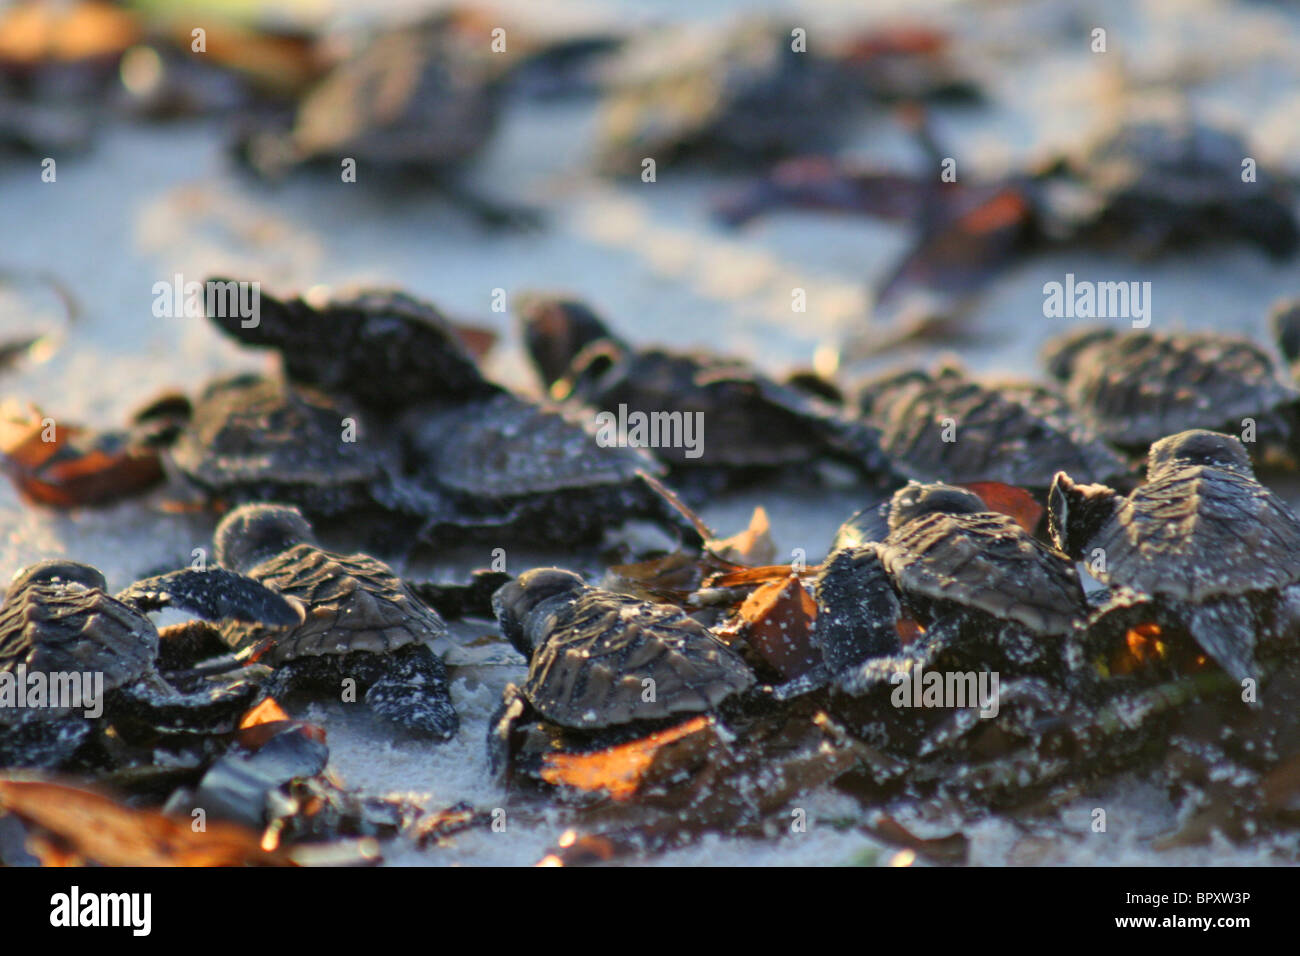 Release of 1 day old Hawksbill Turtles (Eretmochelys imbricata) hatchlings, on the beach of Bird Island at sunset Stock Photo